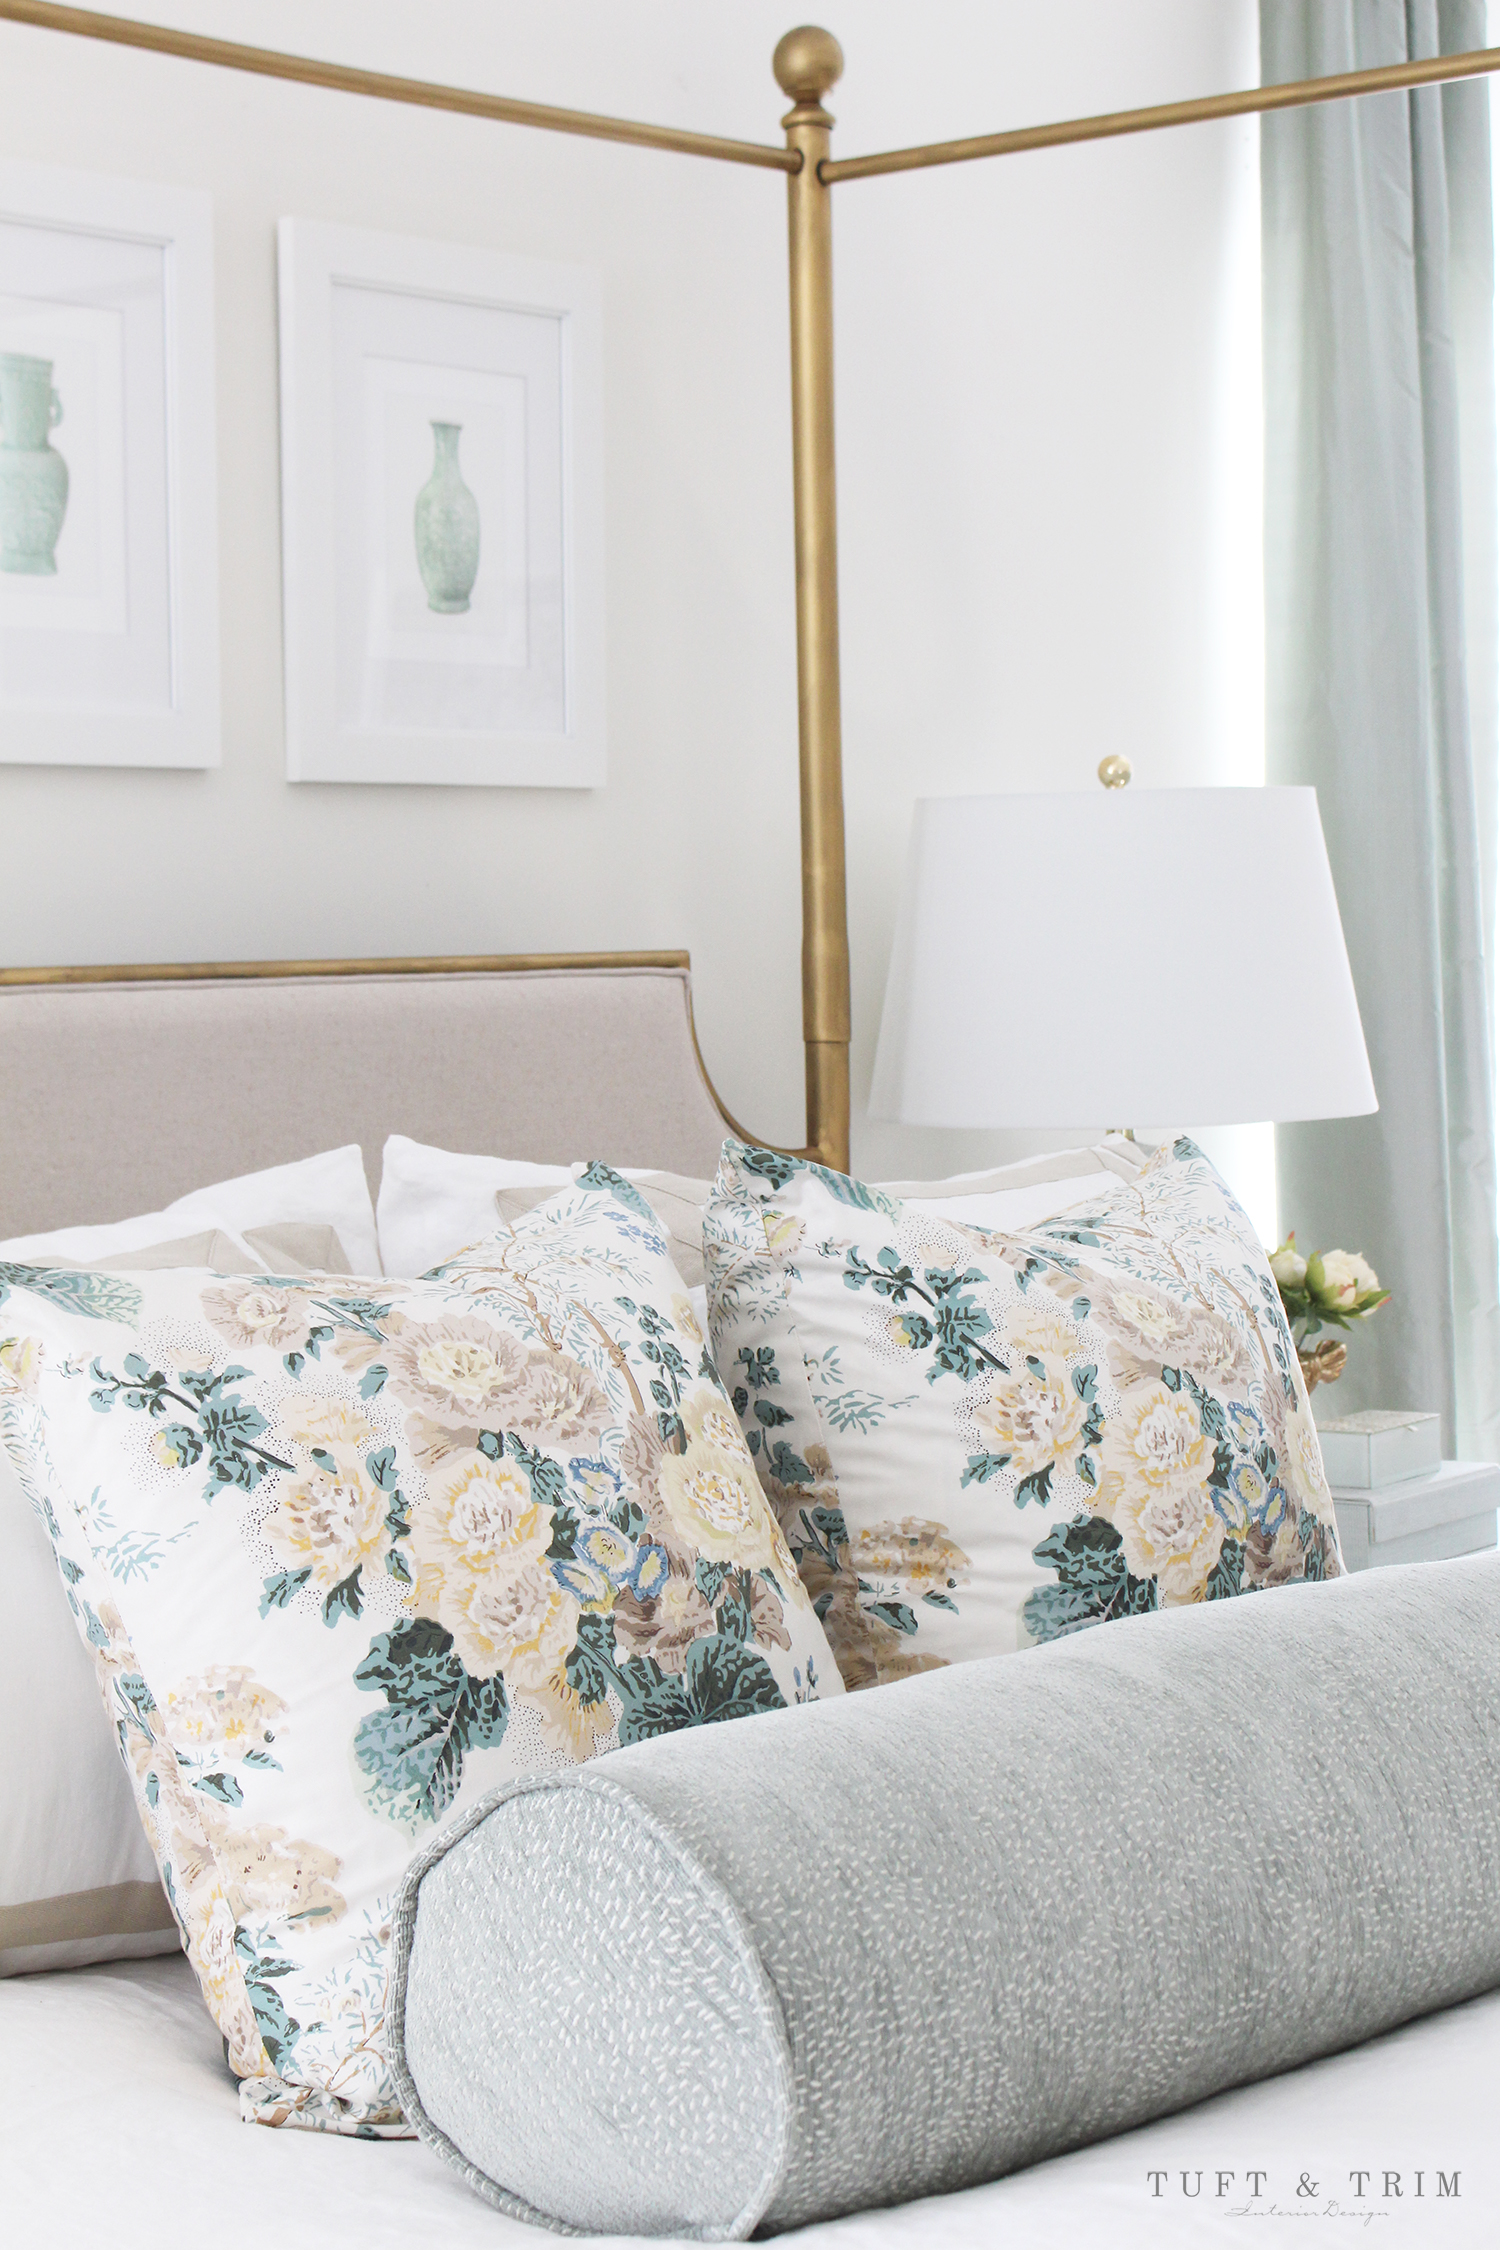 Designer Pillows & Styling Tips for Spring with Tuft & Trim Interior Design